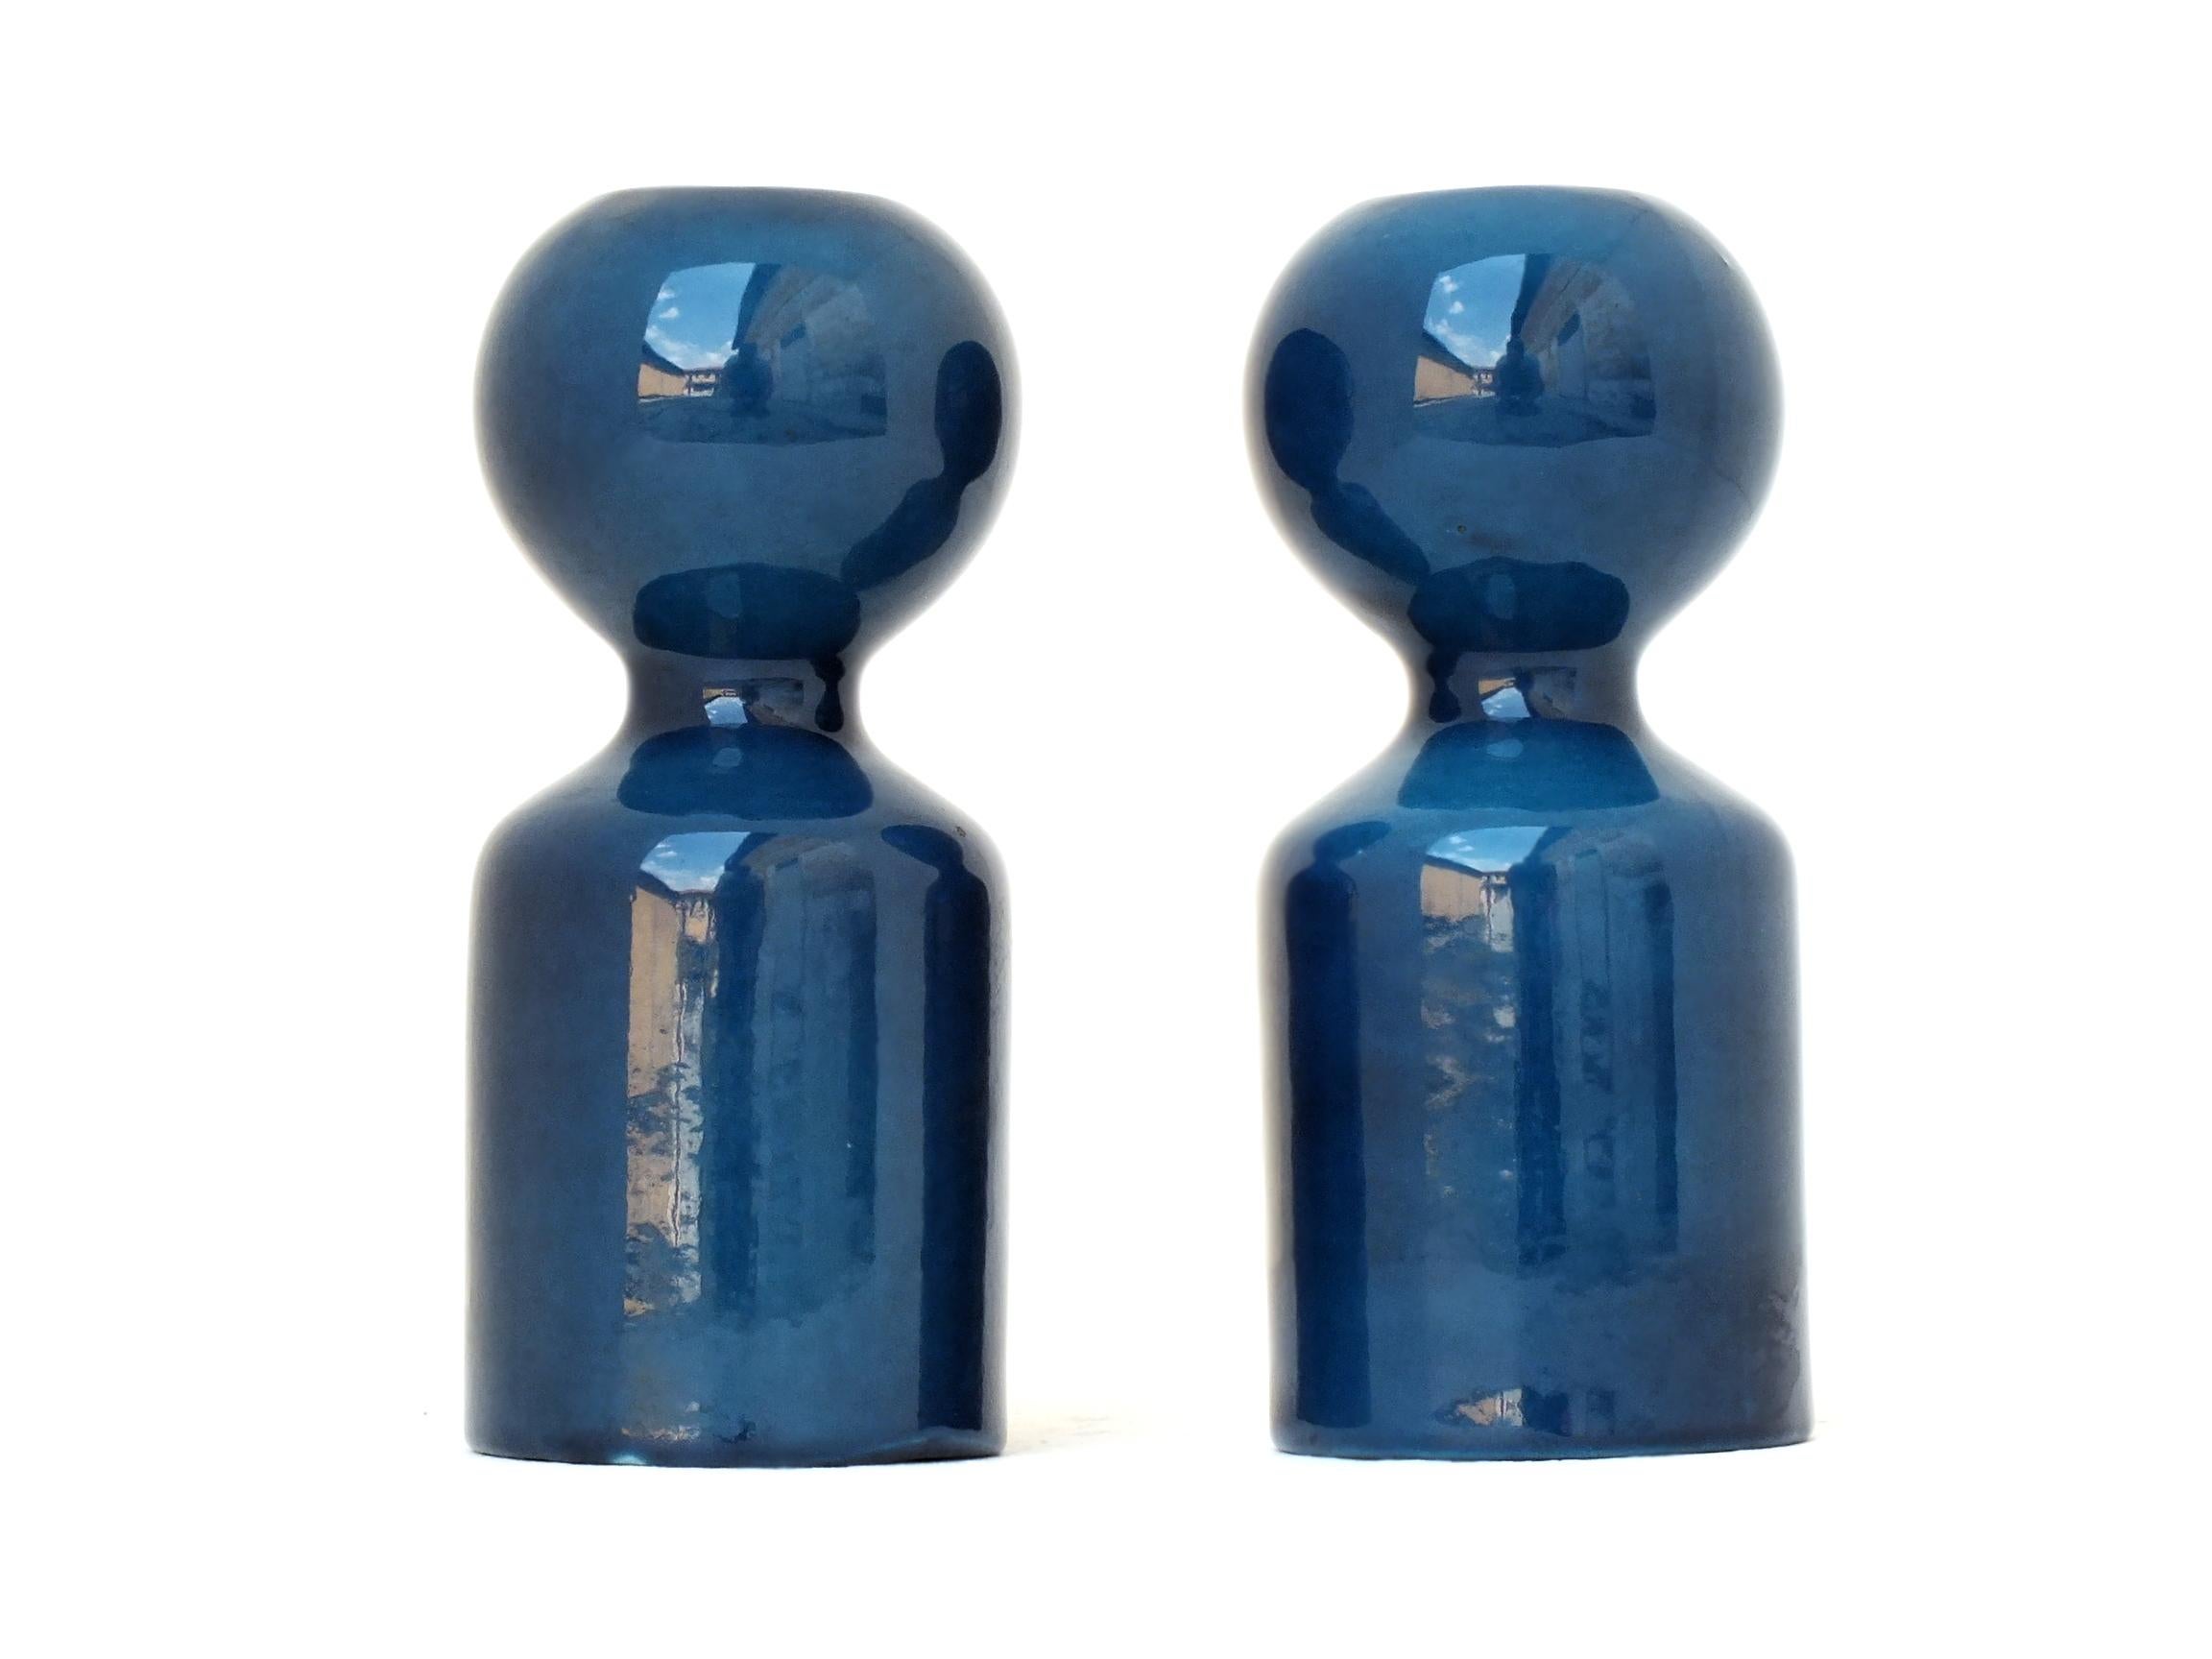 Gabbianelli Ceramic Design Liisi Beckmann two candleholders years '70 in very elegant color bleu night avio

 measures: 8.2 inches height x 3.6